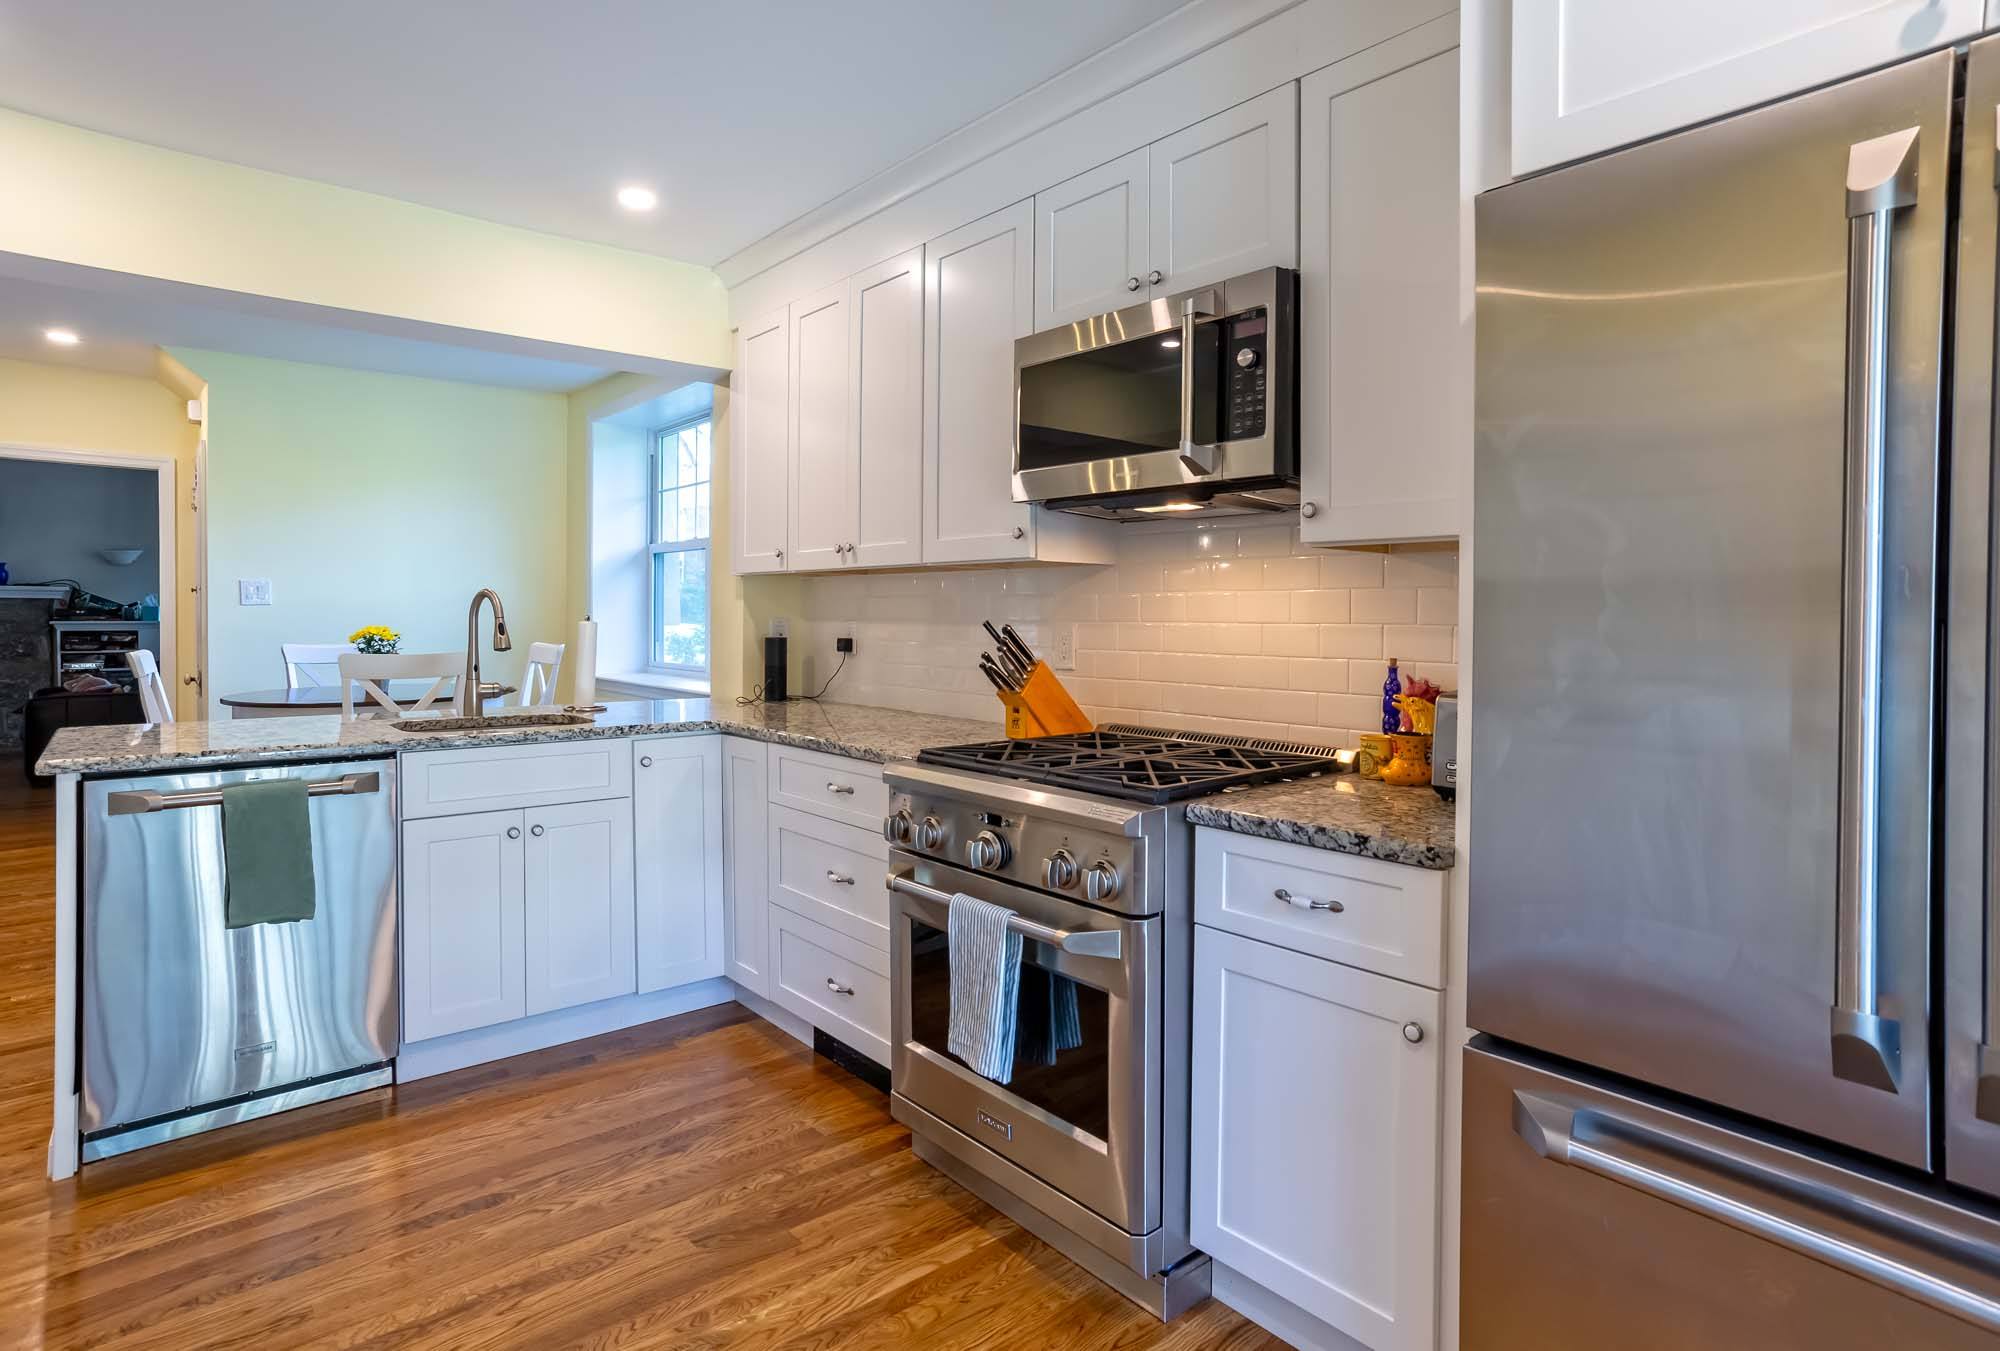  buying kitchen cabinets online advice